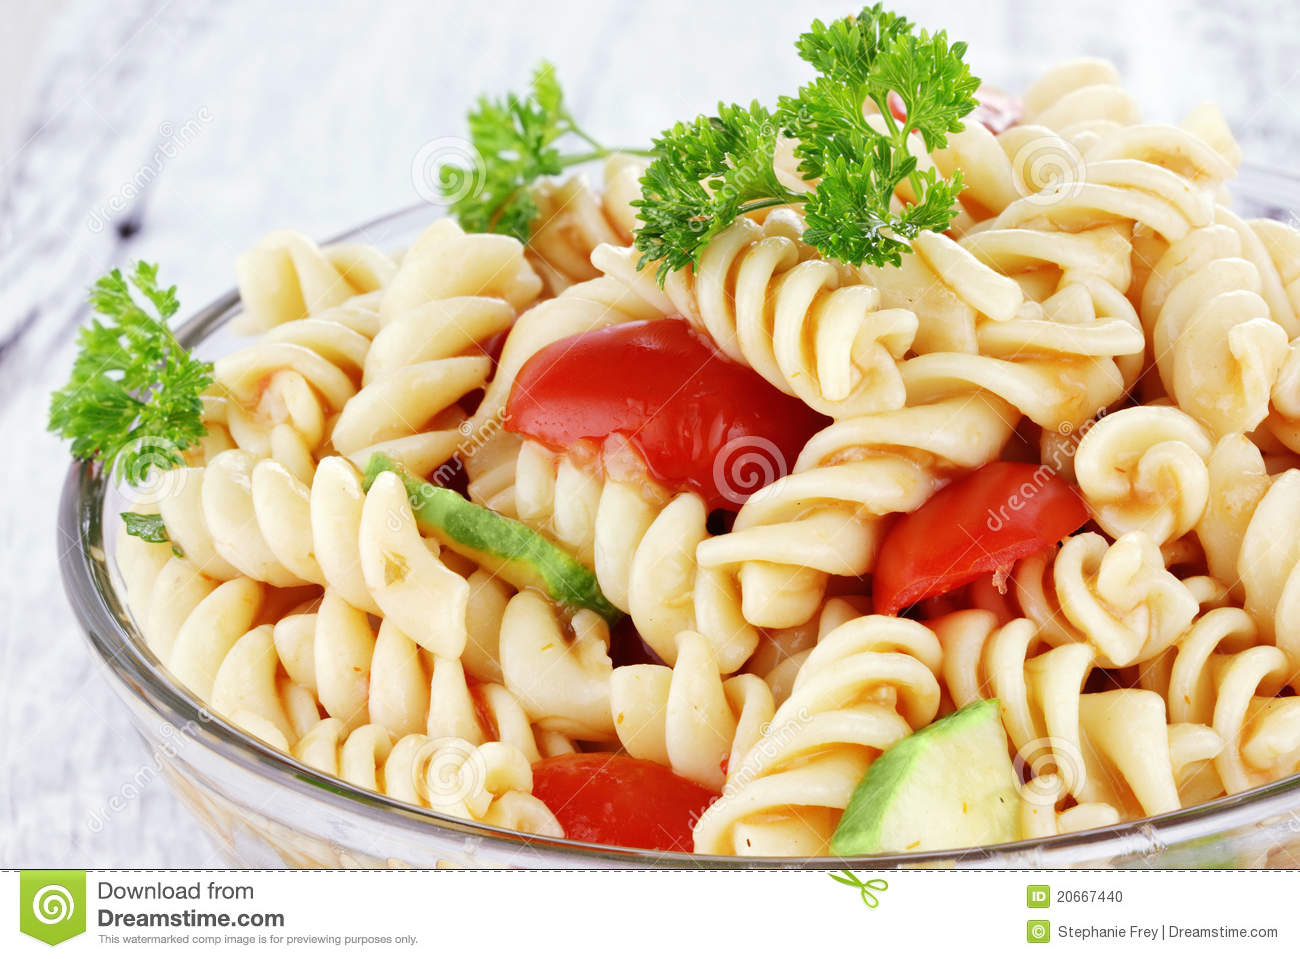 Pasta Salad With Dressing Fresh Tomatoes Cucumbers And Parsley